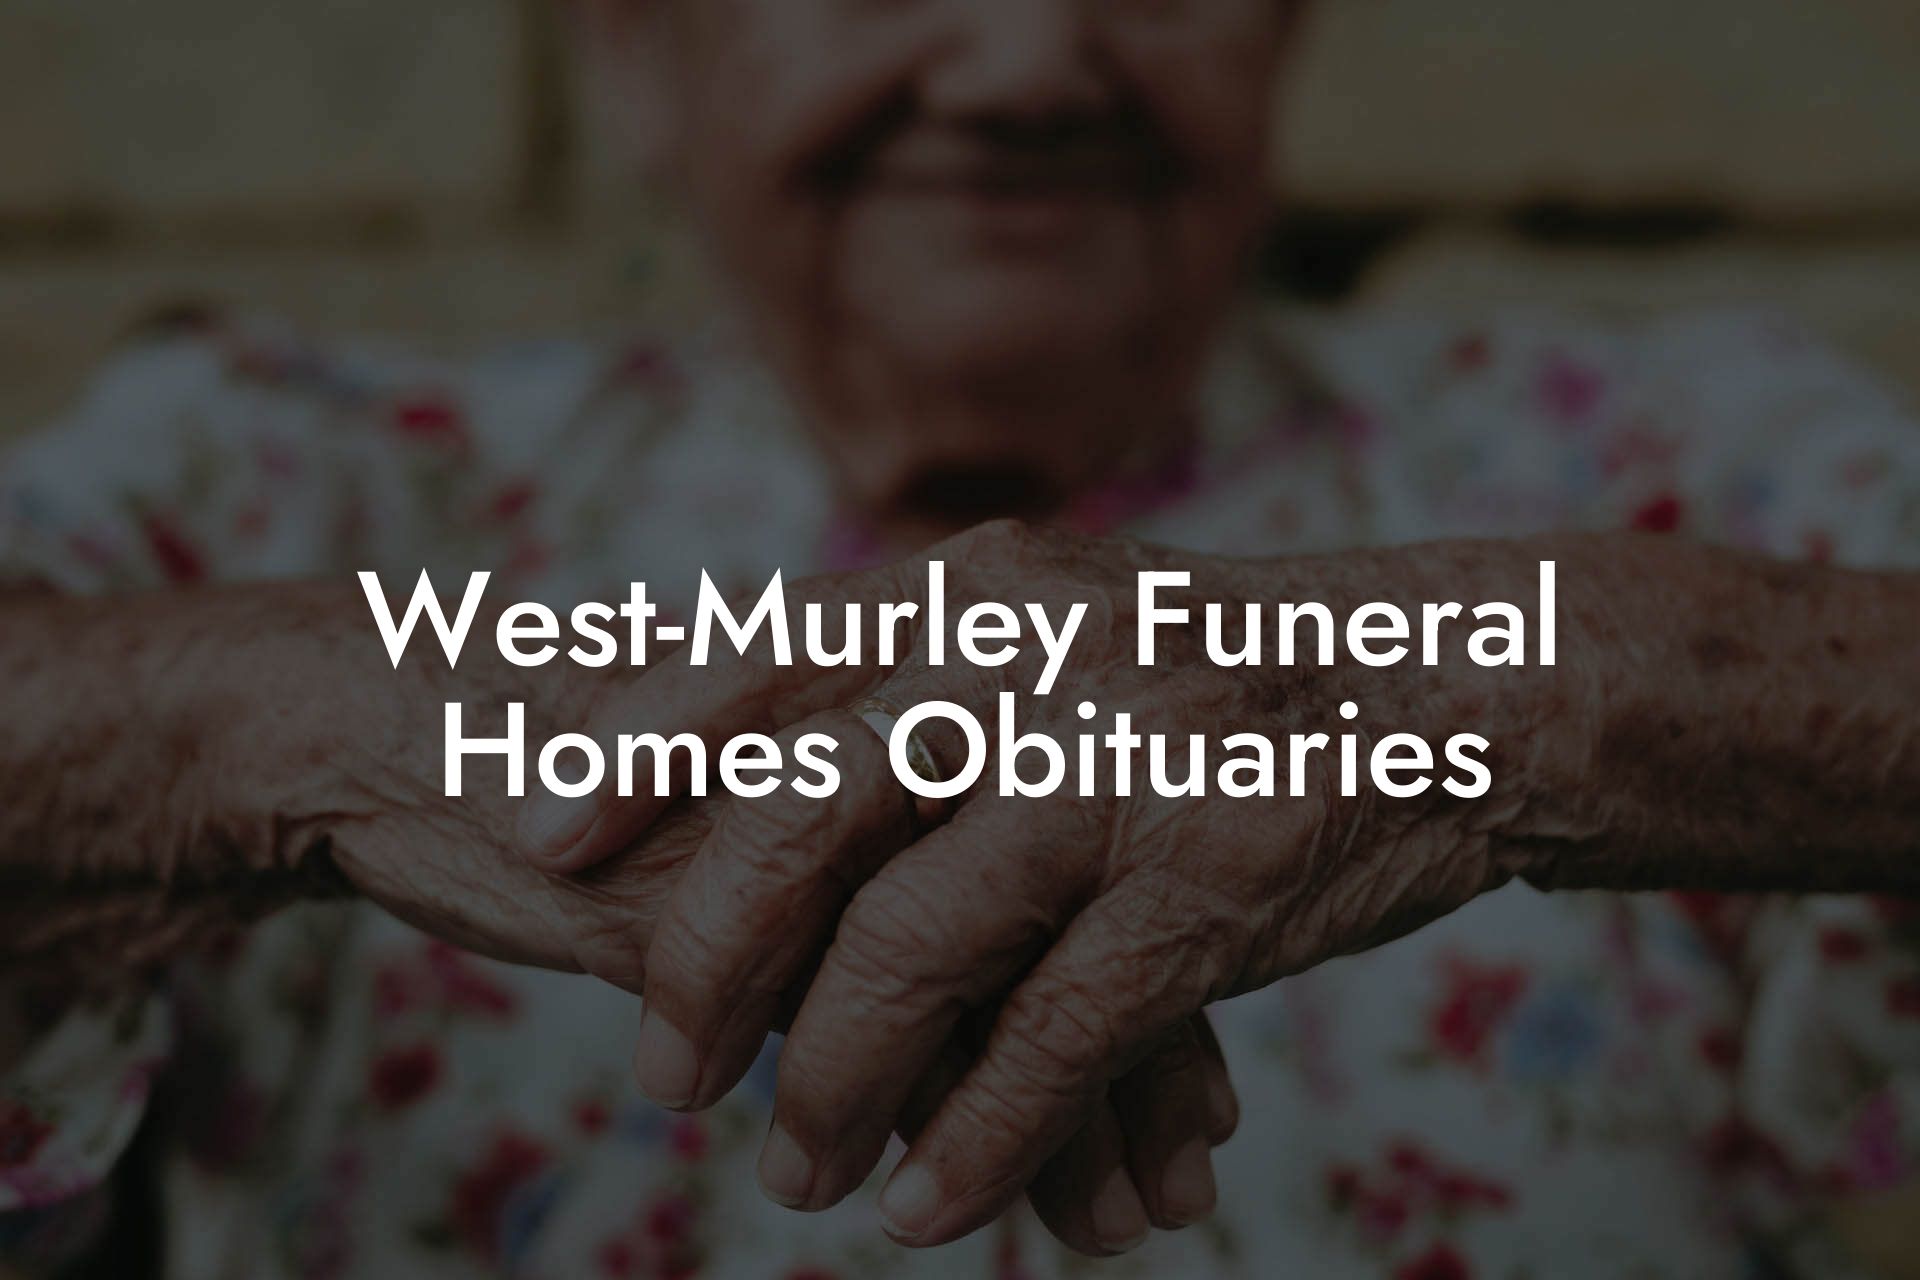 West-Murley Funeral Homes Obituaries